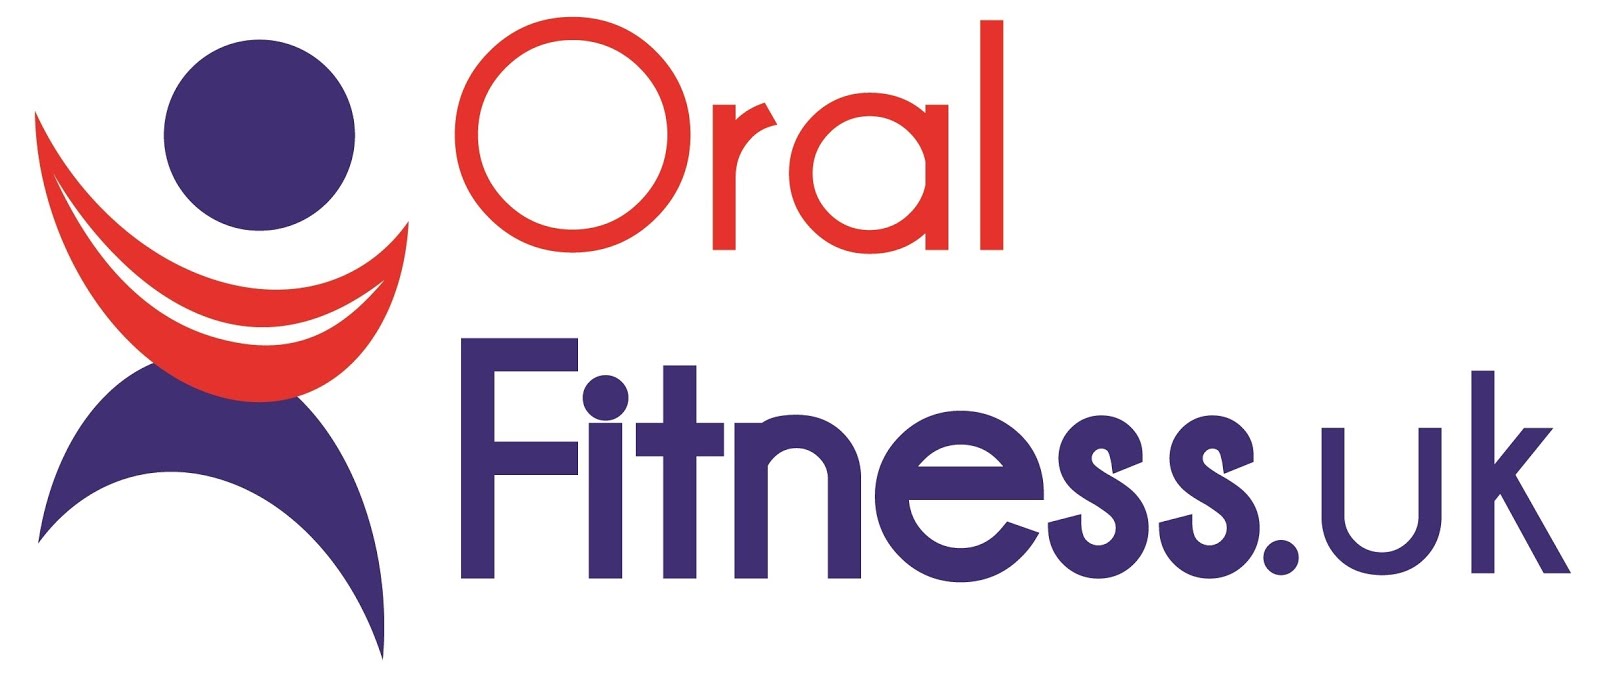 Oral Fitness